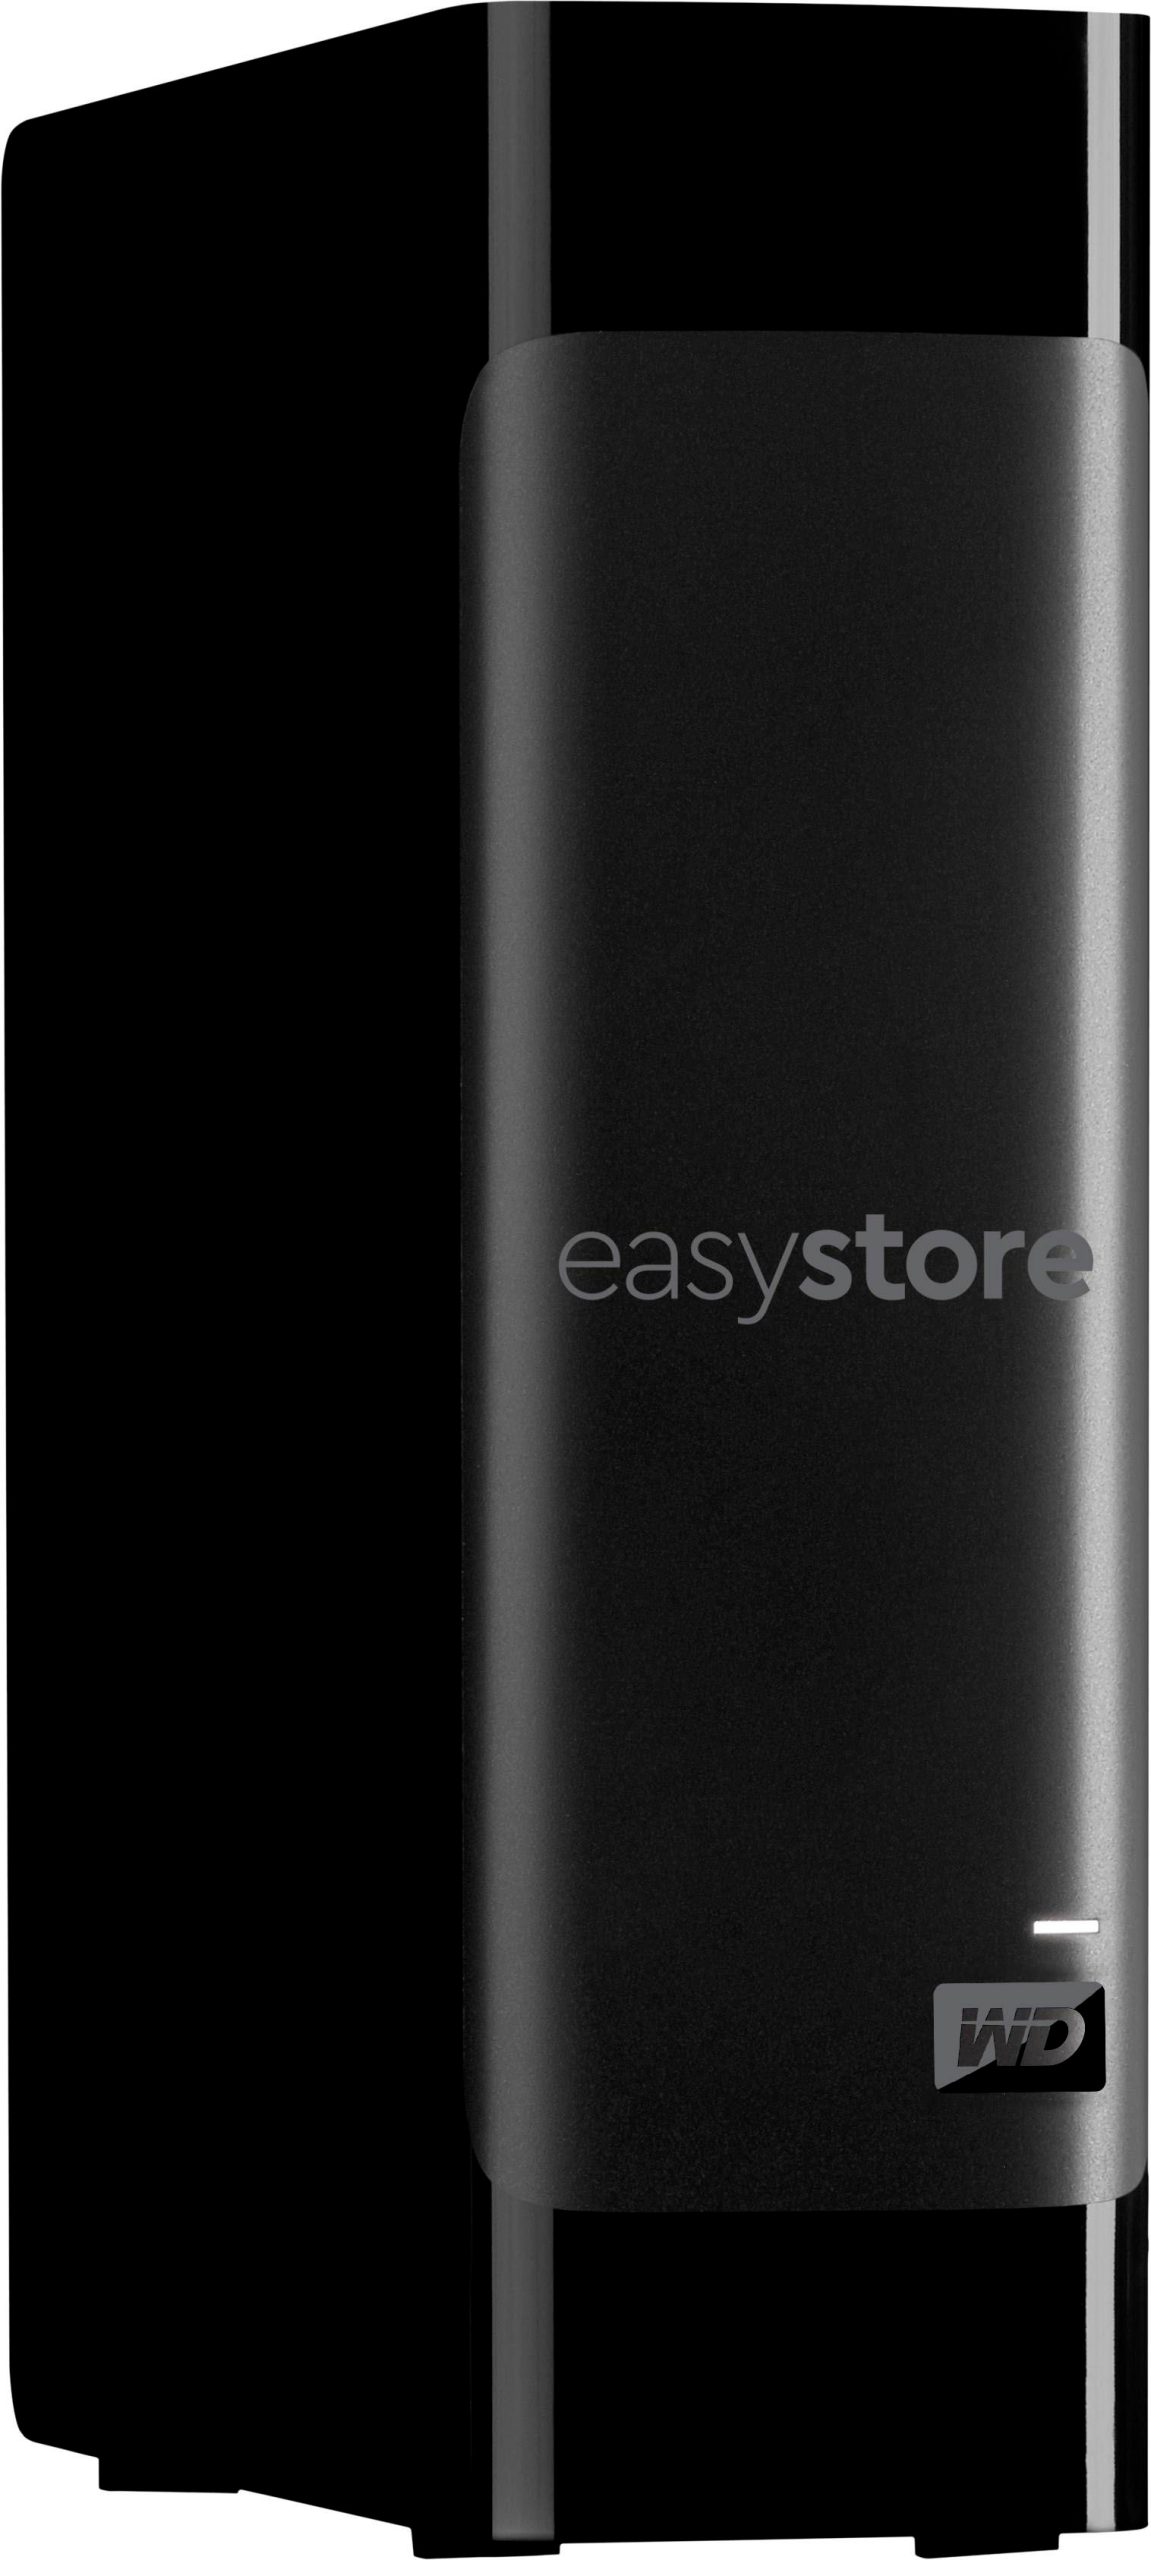 WD – easystore 14TB External USB 3.0 Hard Drive – Black – Just $259.99 at Best Buy